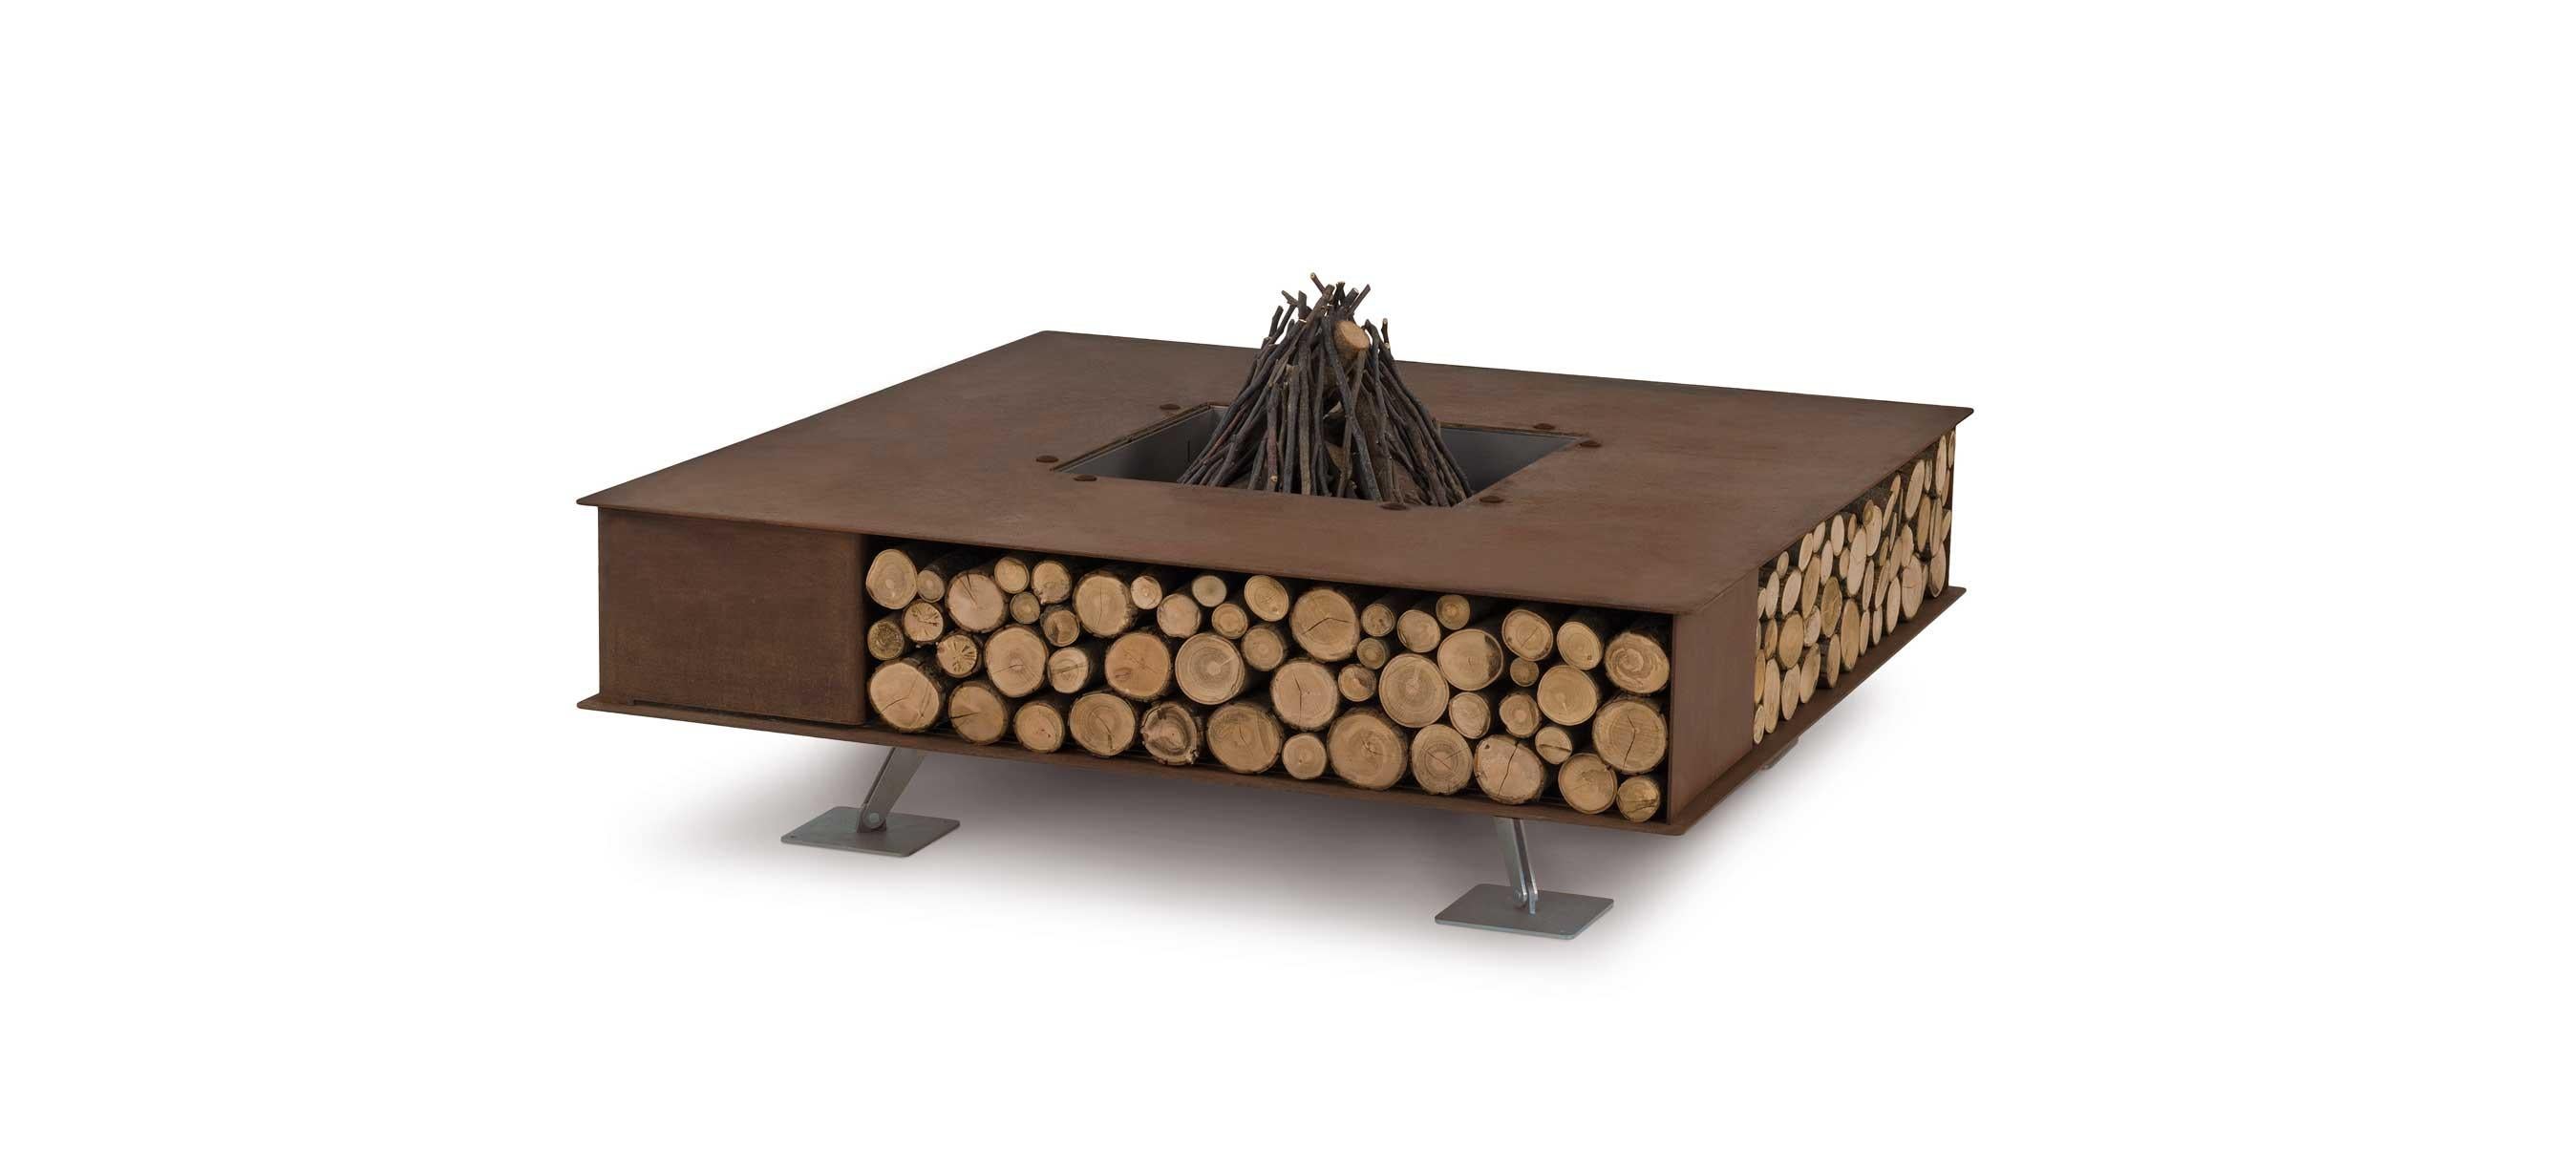 Toast fire pit by AK47 design

Steel fire pit 1250×1250 mm.
Toast is a wood-burning outdoor fire pit.
Design and art blend to present the fire with a contemporary style.
Ideal for places where the space is limited, as gardens, terraces, hotels